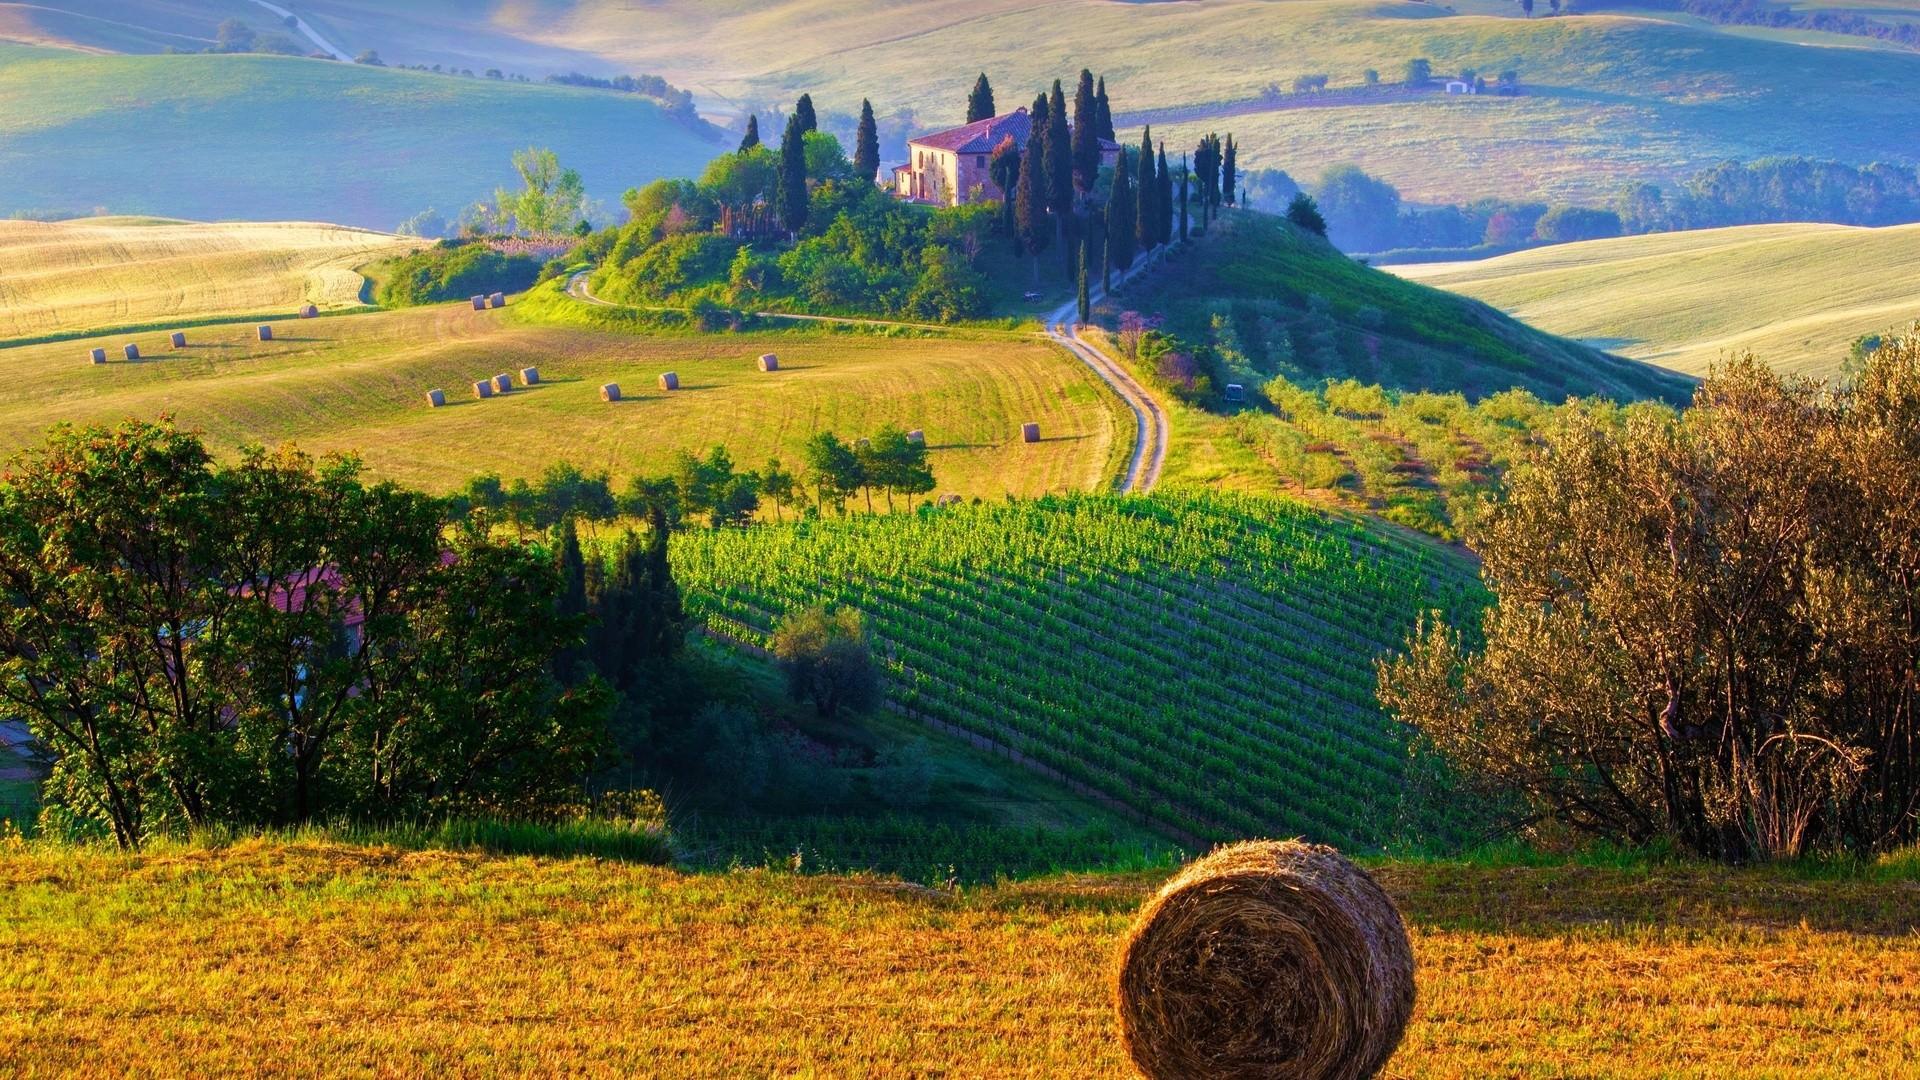 Farmers' fields in Italy wallpaper and image